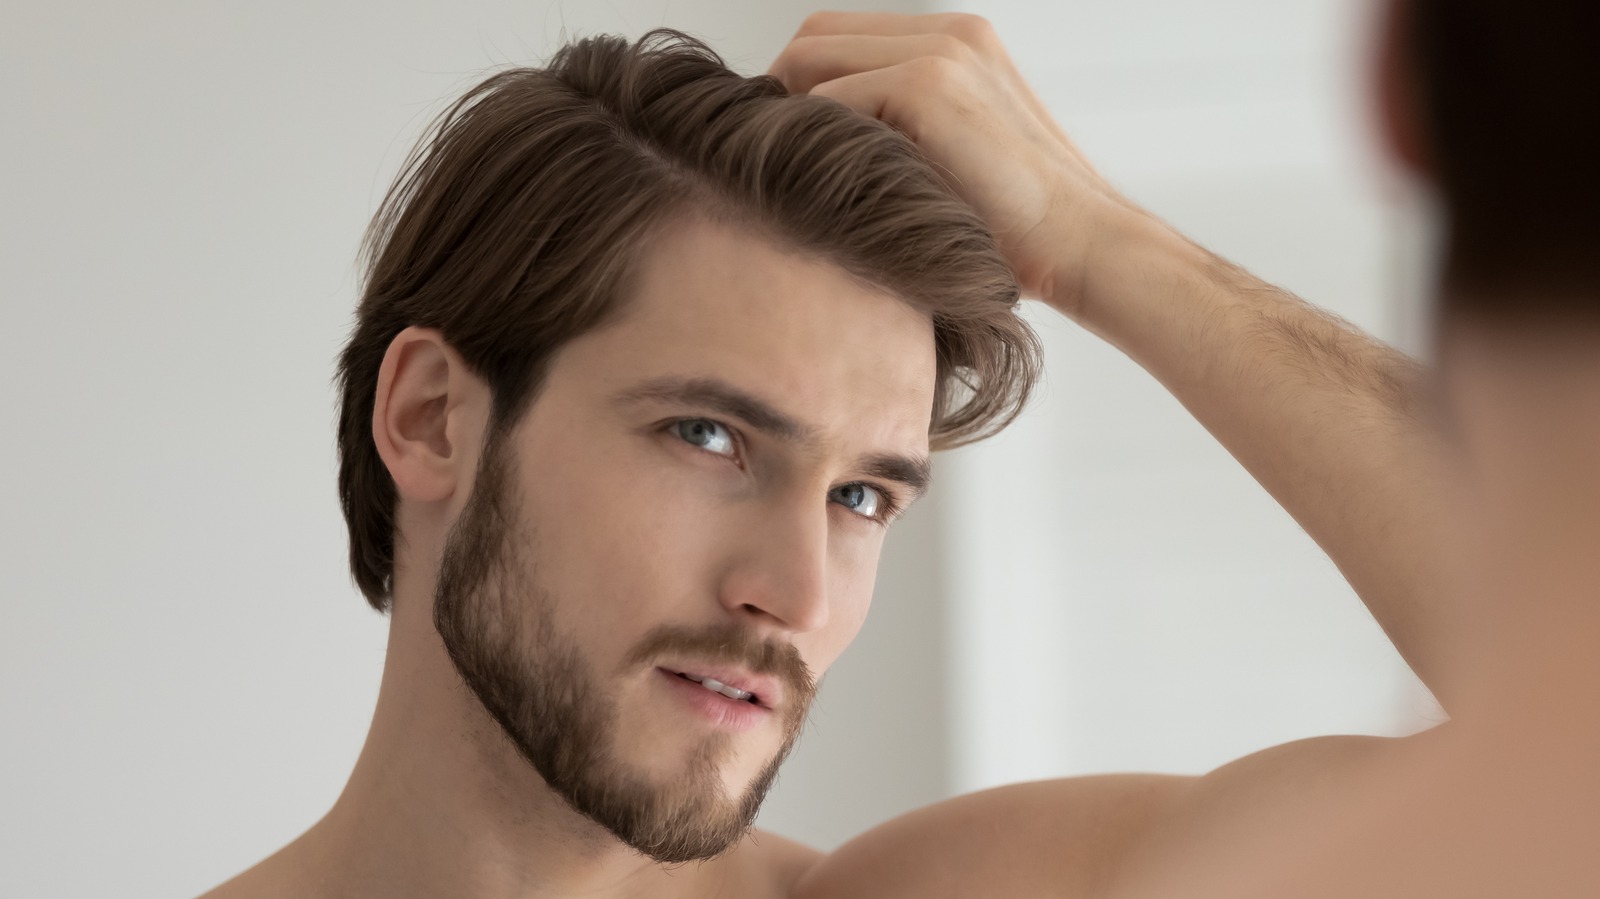 Forhair Hair Transplant Korea - #recedinghairline #regrowth There are  various options to control hair loss, but the most effective or probably  the ONLY way to restore and reshape hairline as you wish